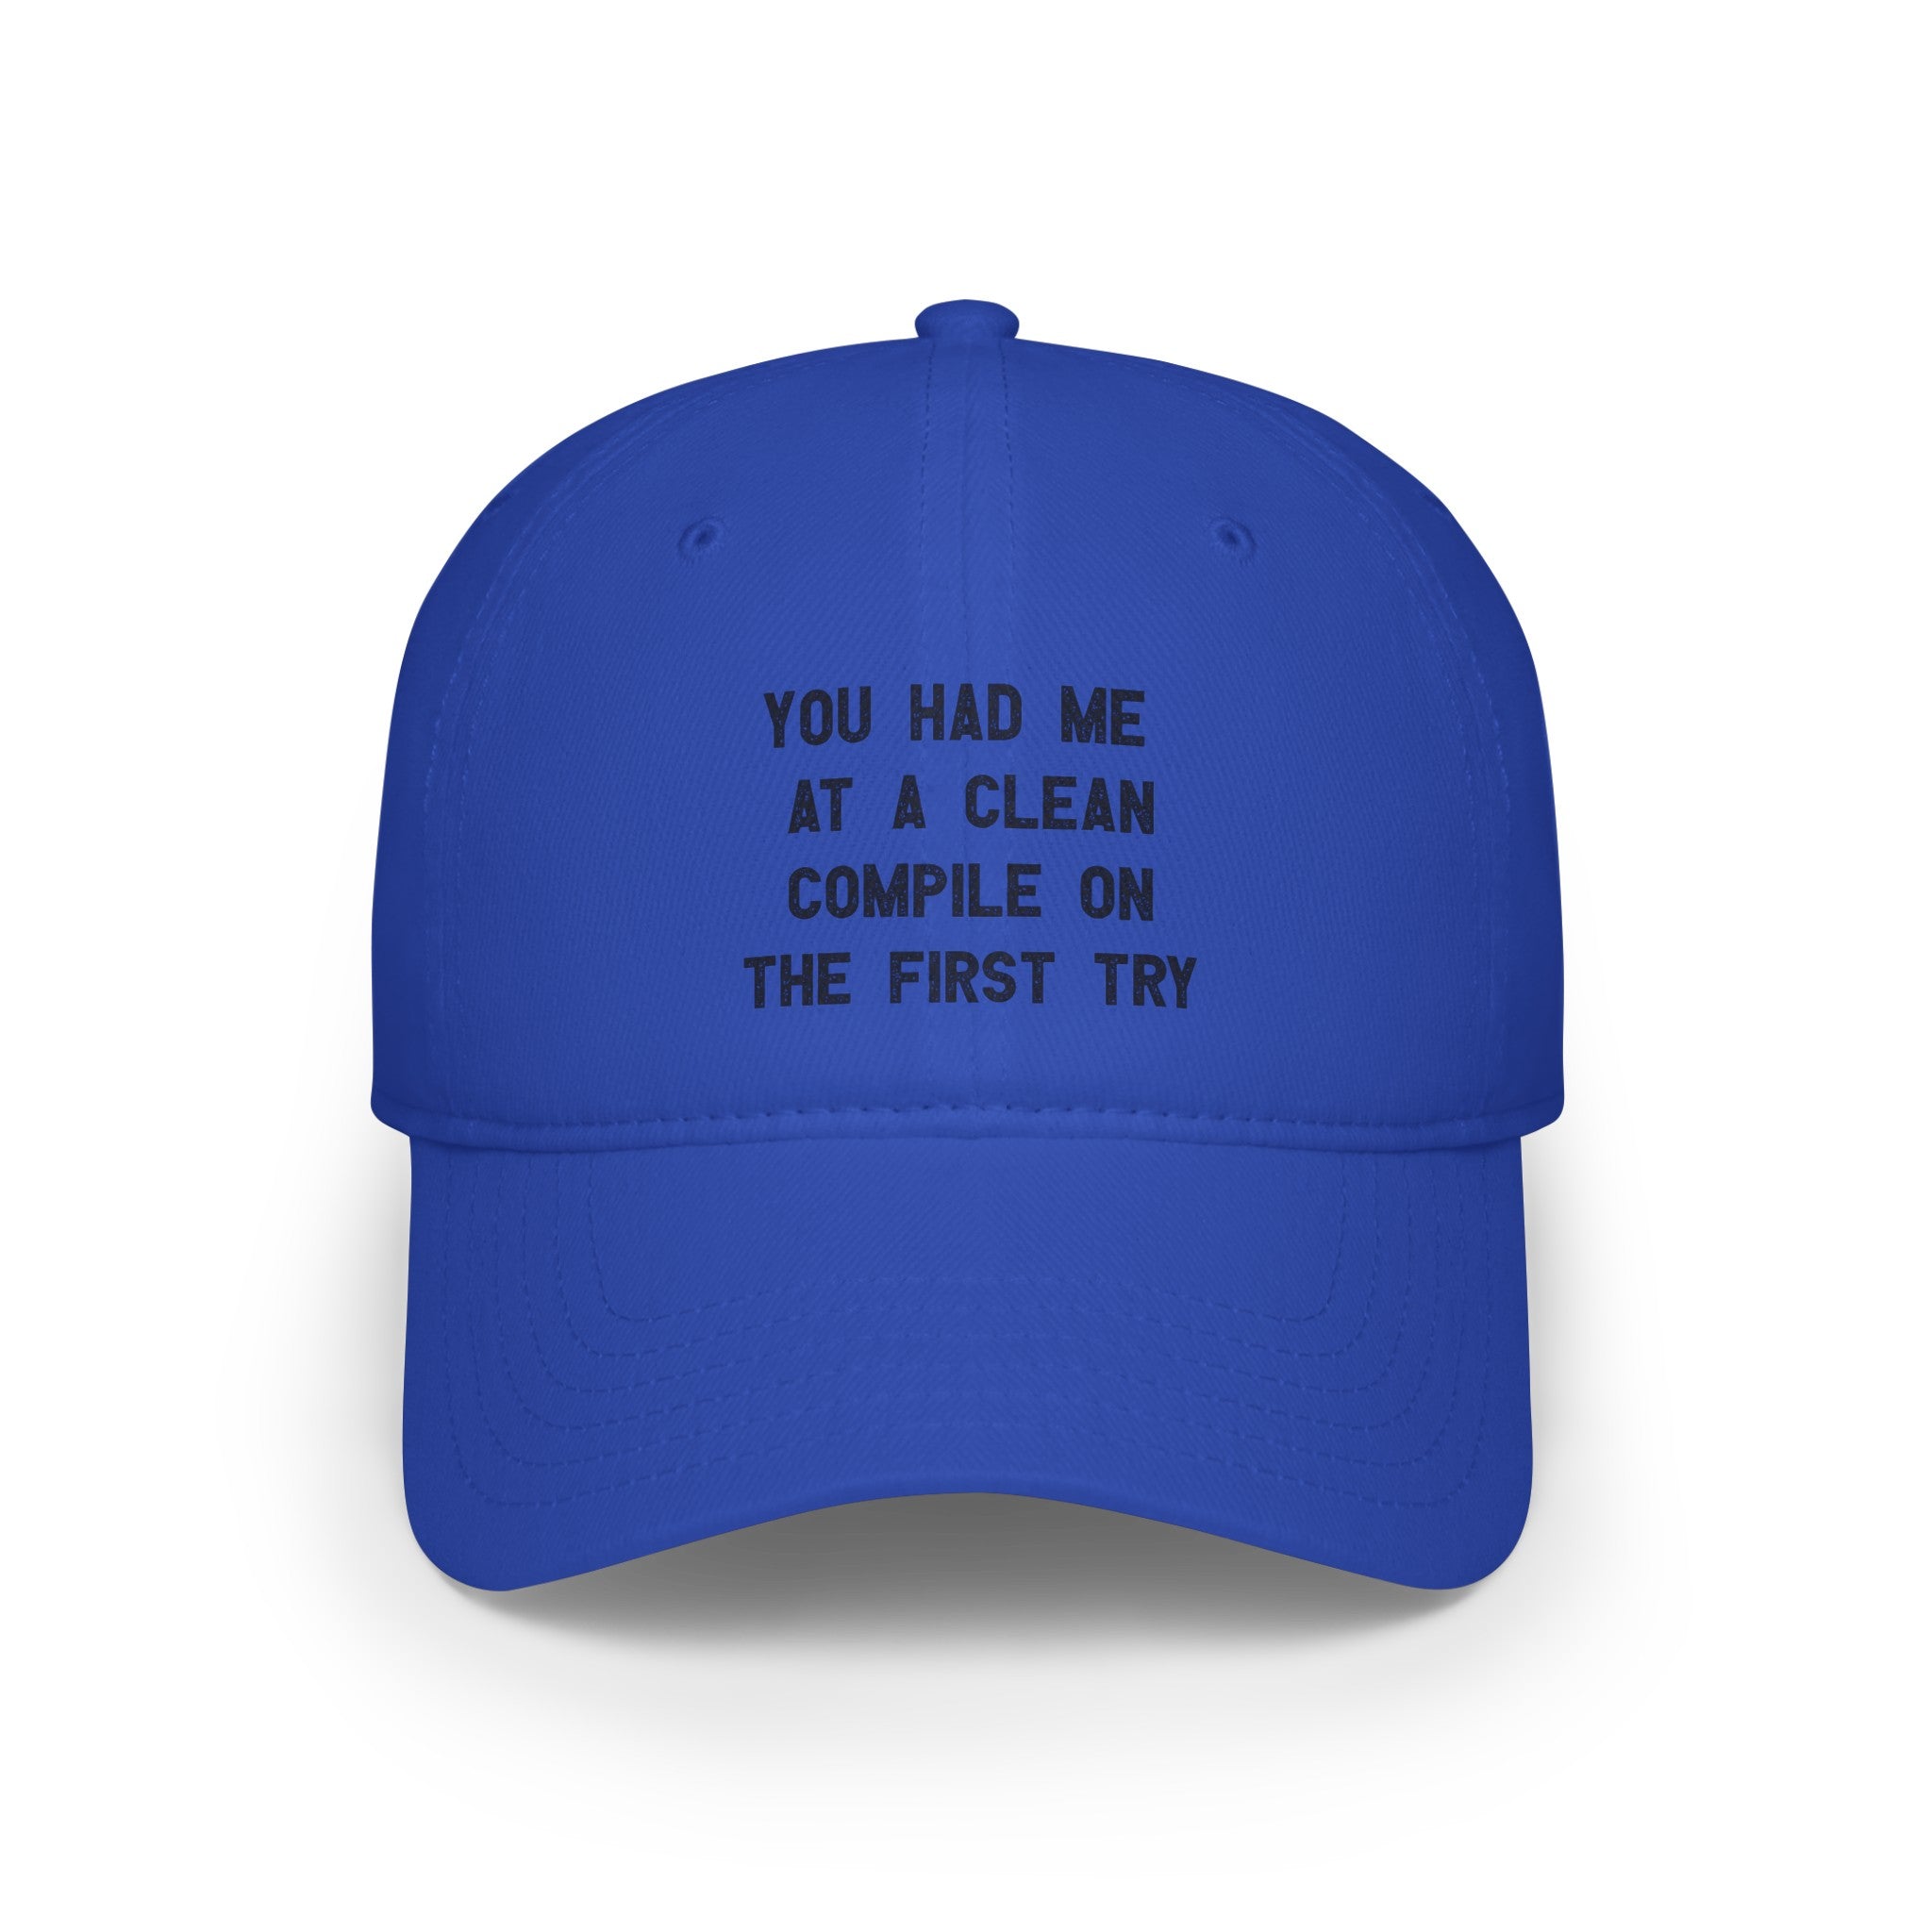 A blue baseball cap with durable stitching, featuring the text "YOU HAD ME AT A CLEAN COMPILE ON THE FIRST TRY" printed in black on the front. Perfect for anyone who appreciates You Had Me At a Clean Compile on the First Try - Hat.